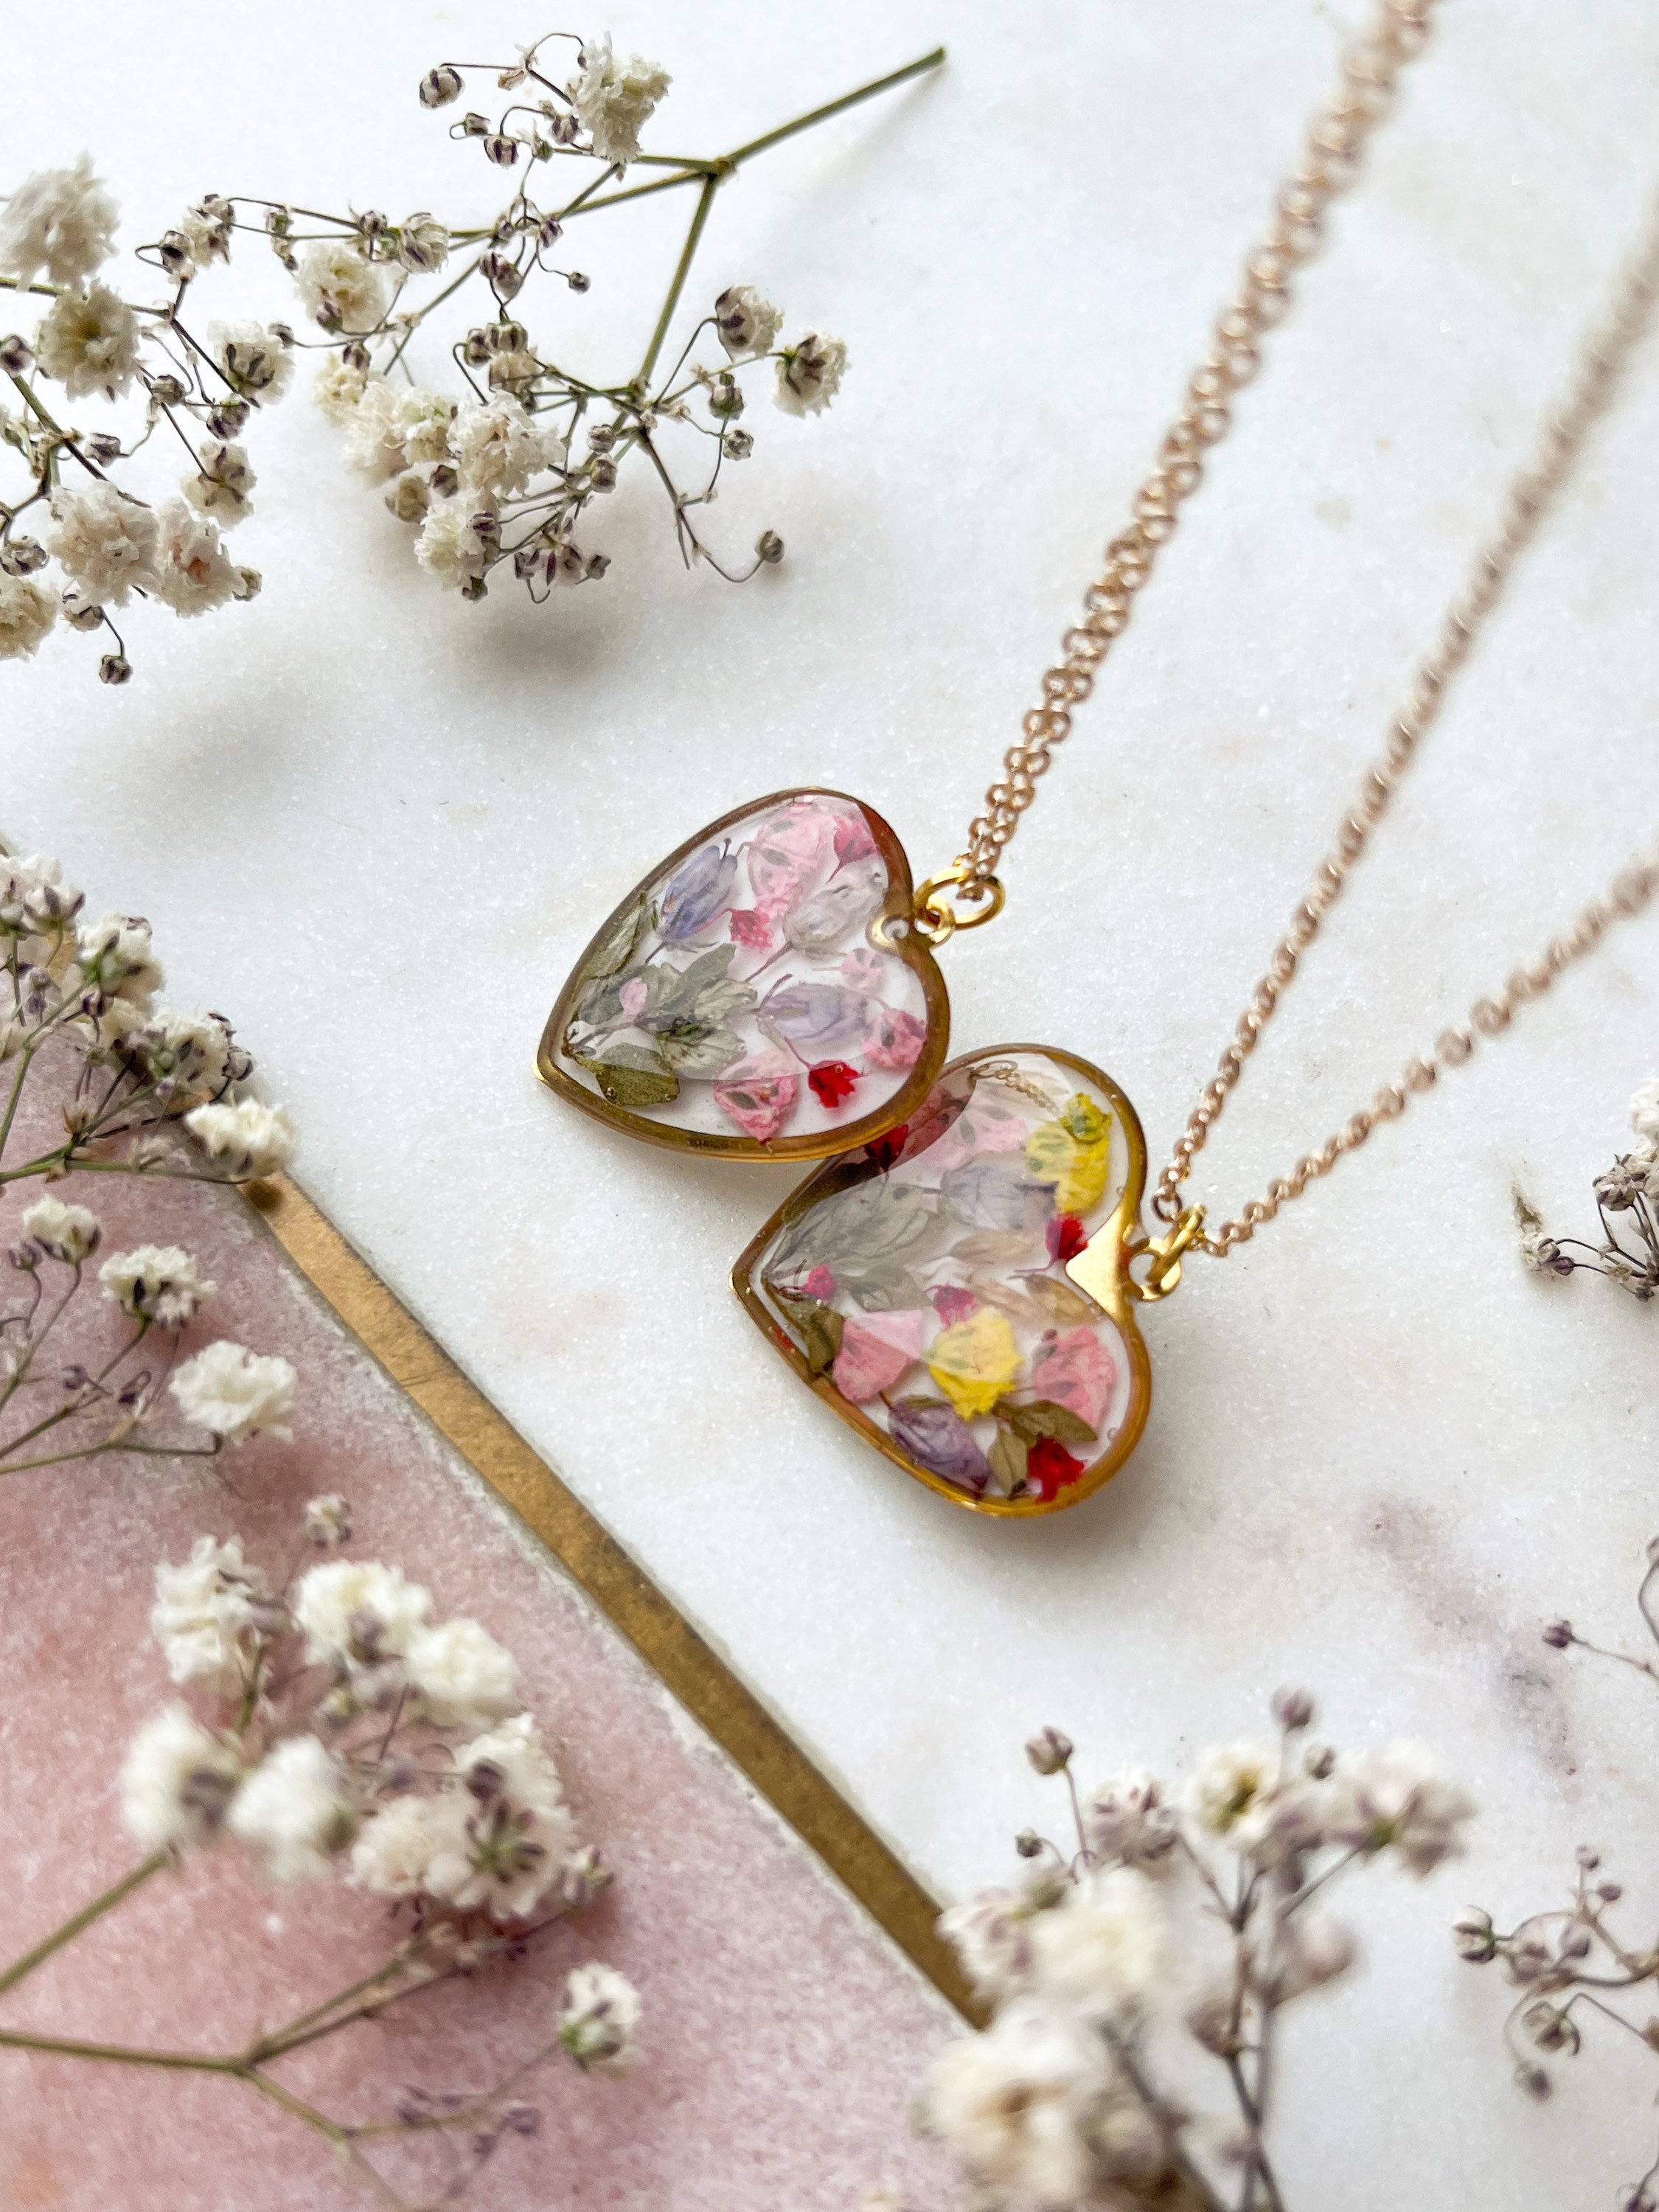 Preserved Wild Flowers Heart Pendant Necklace On 22K Gold Plated Fine Chain/Boho Chic Pressed Jewellery Floral